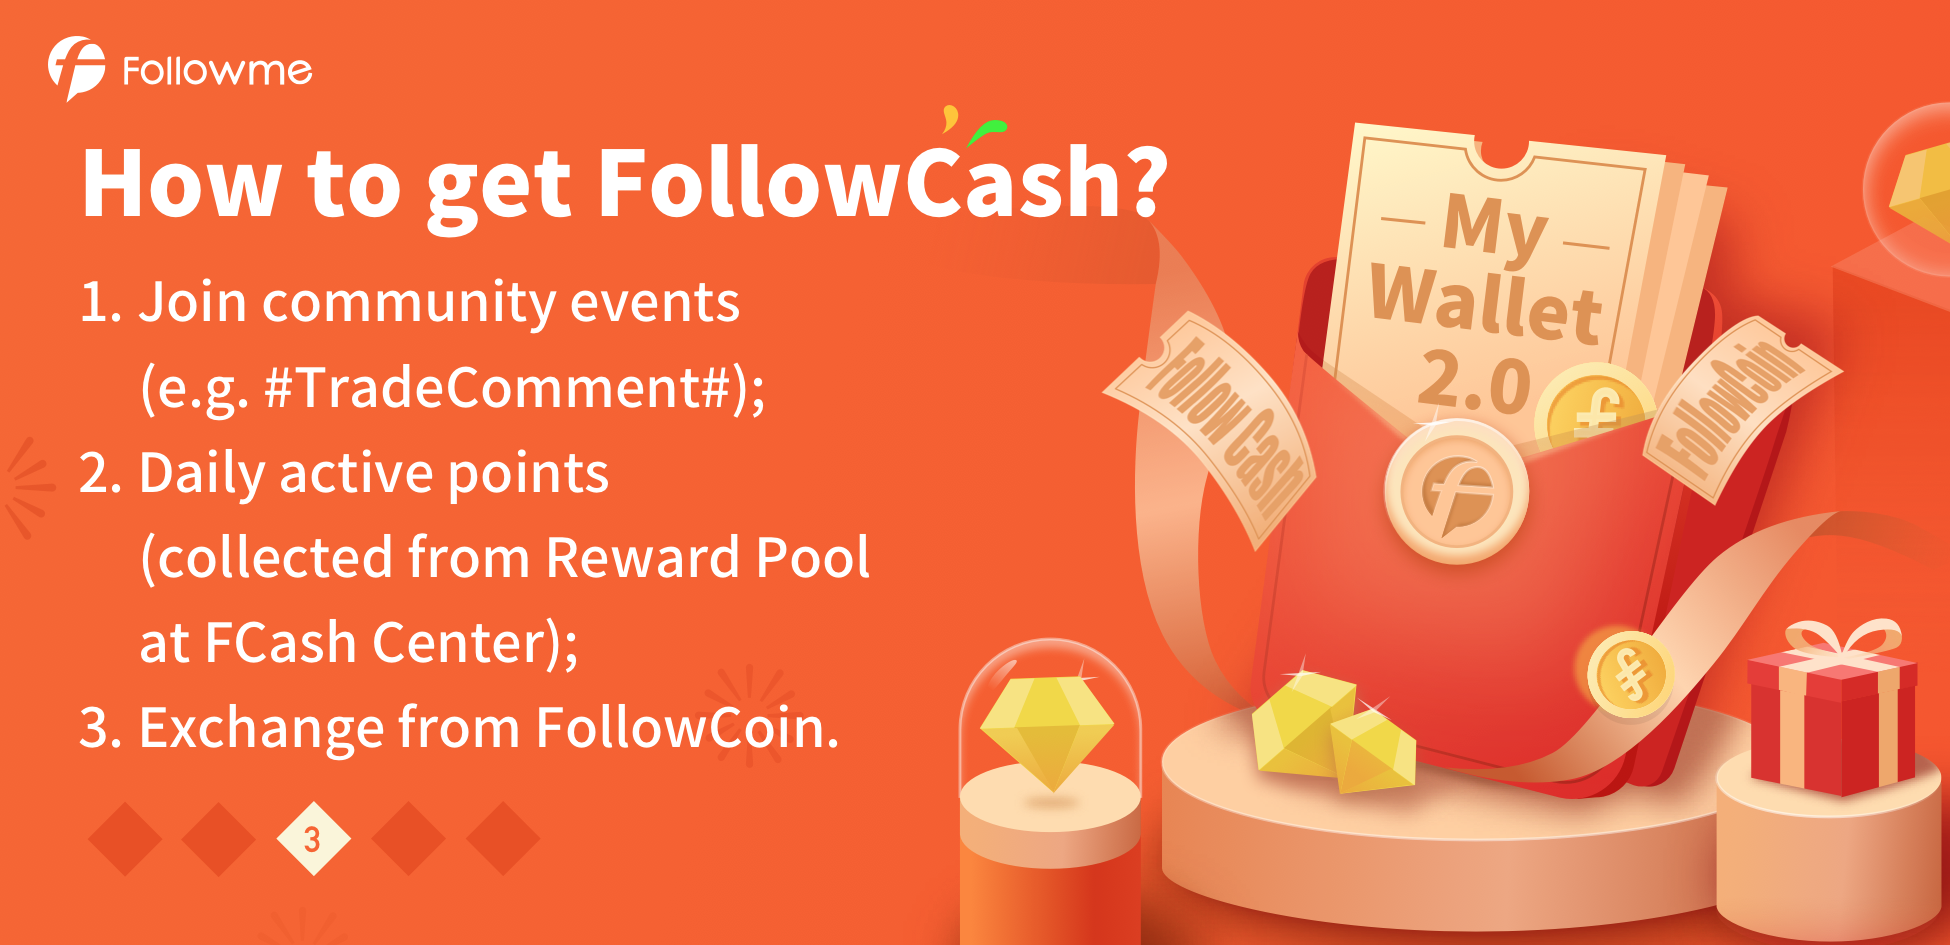 All for You—Find 5 Pictures, Get 20 FollowCash!